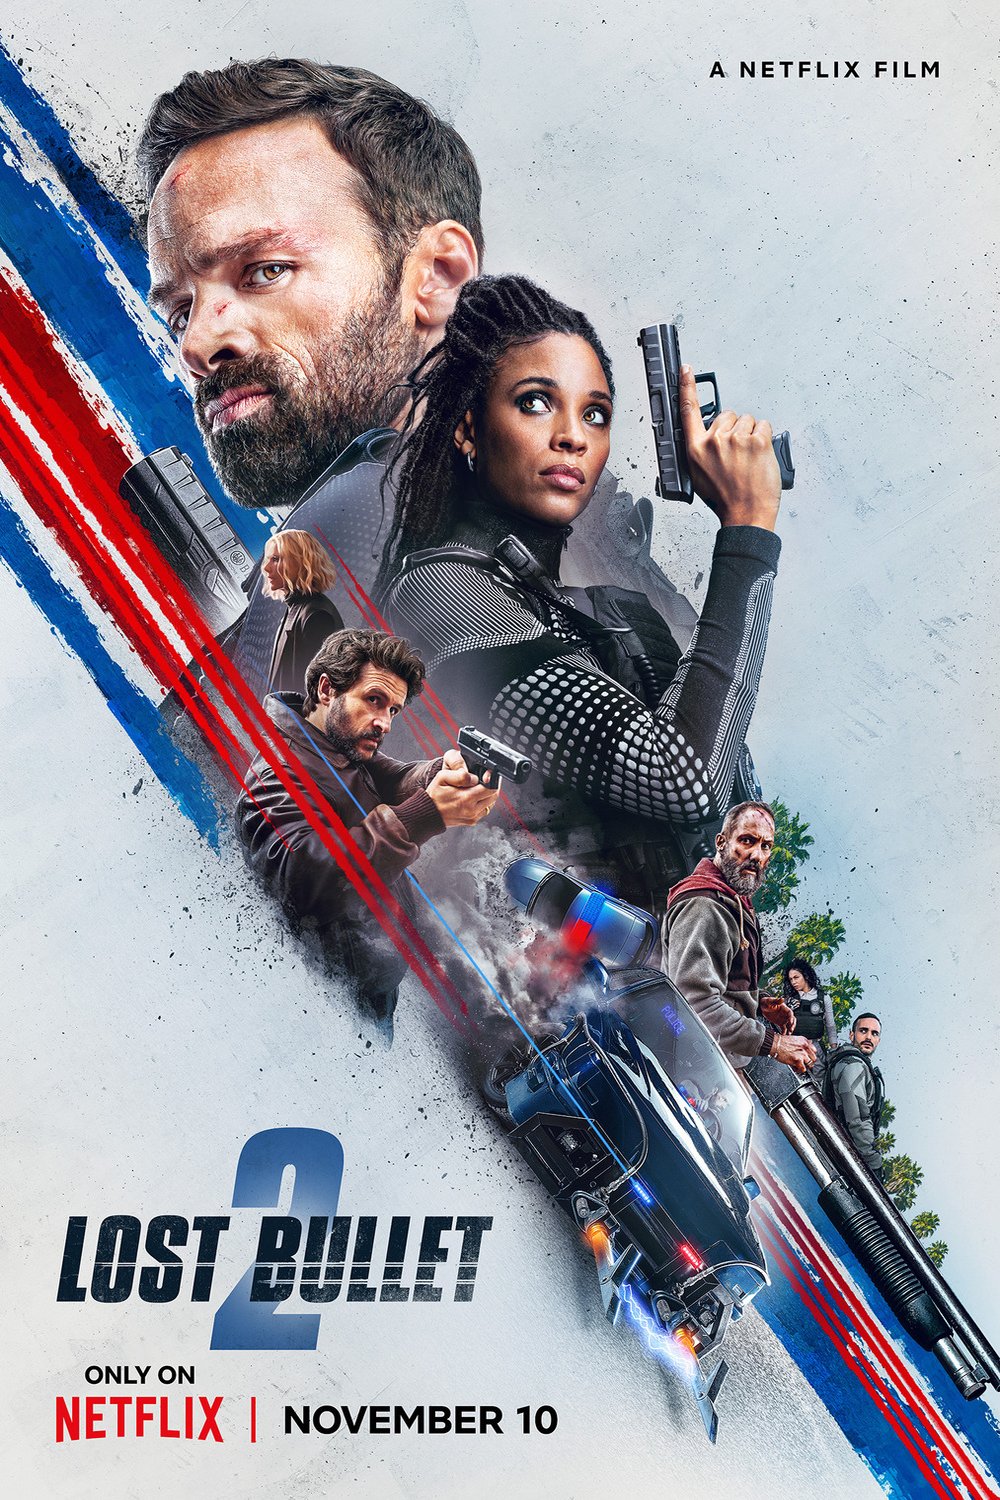 Poster of the movie Lost Bullet 2